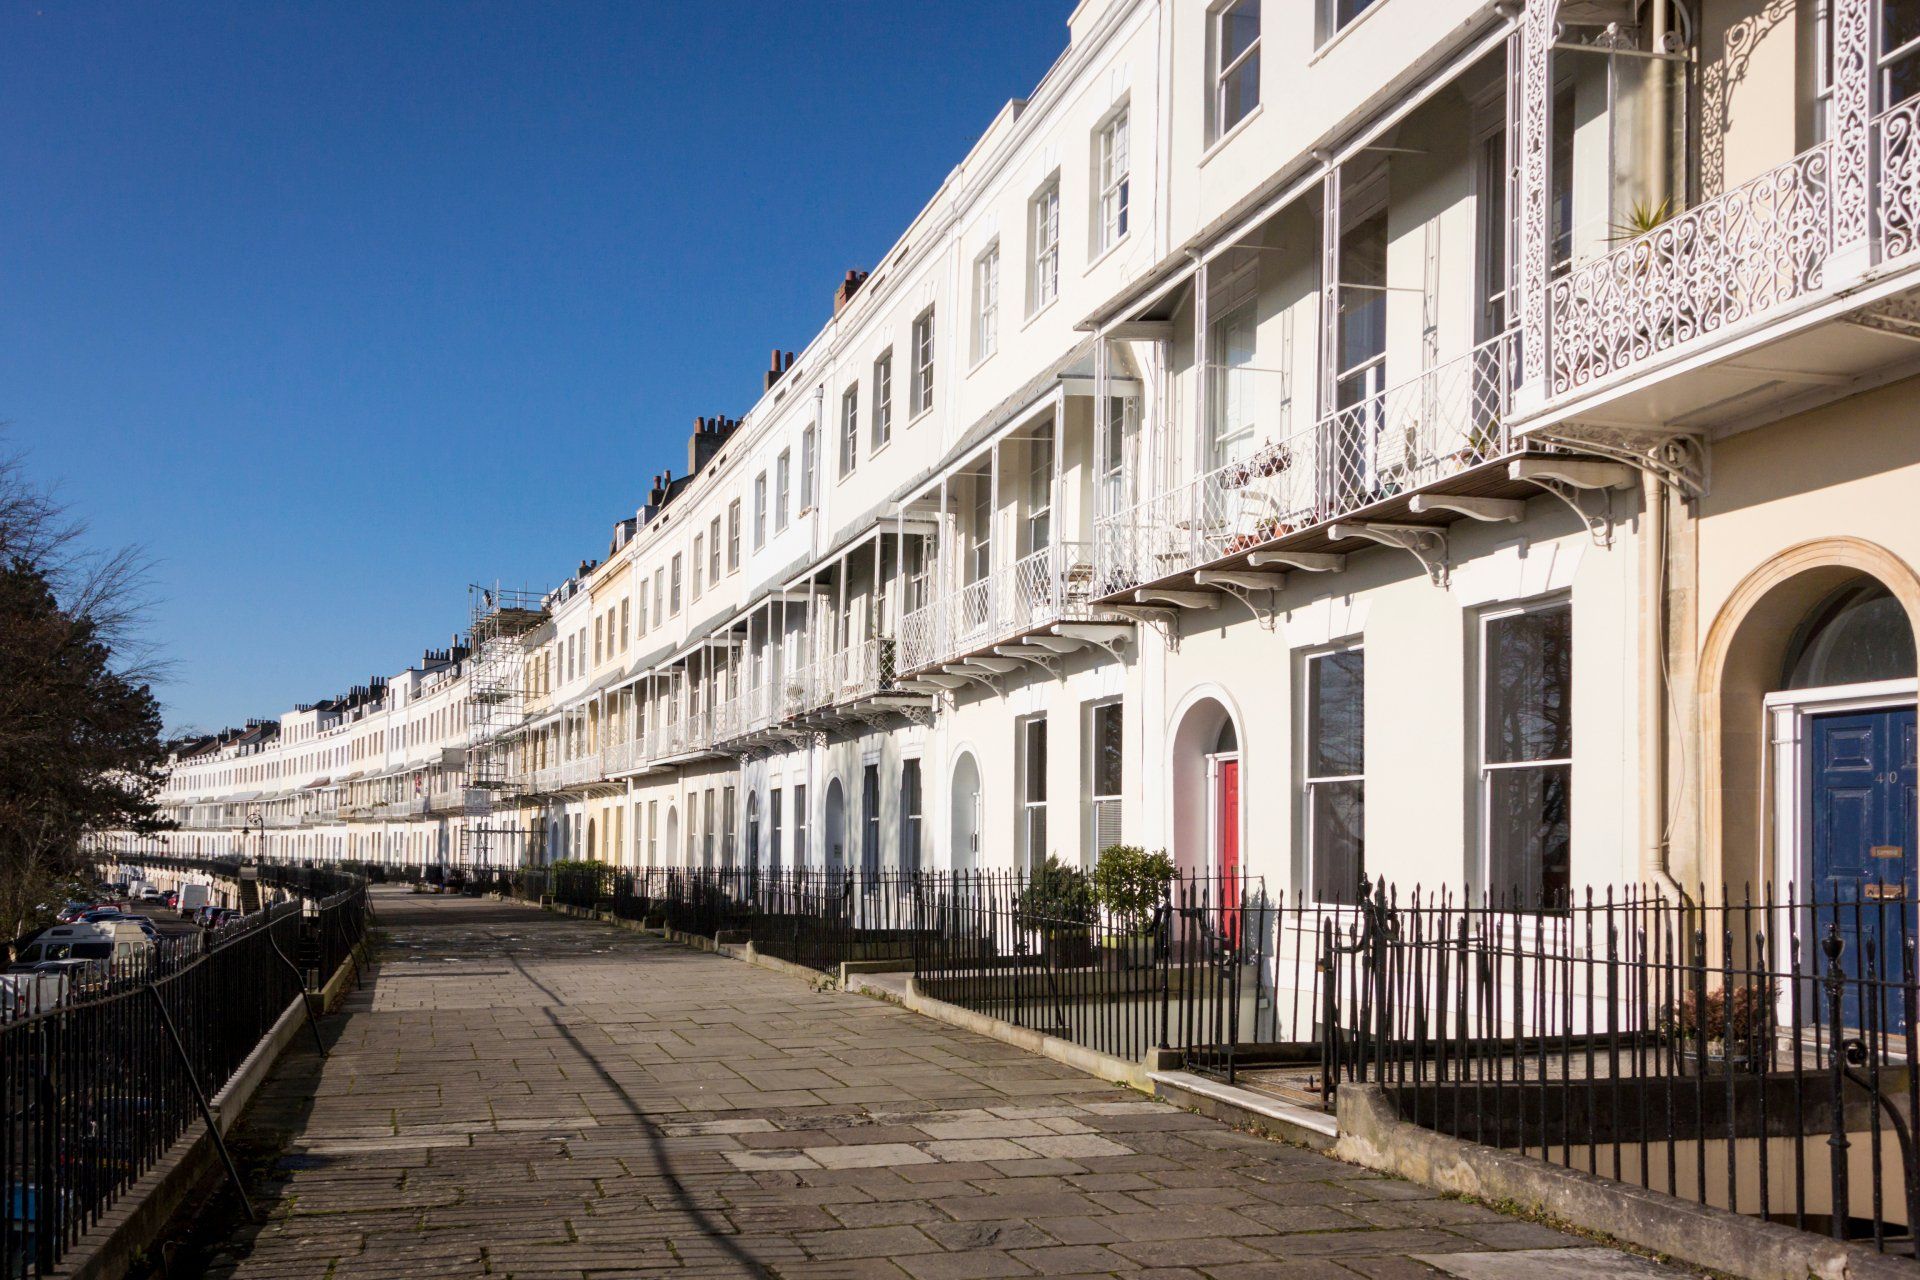 A row of white houses with balconies on a sunny day.